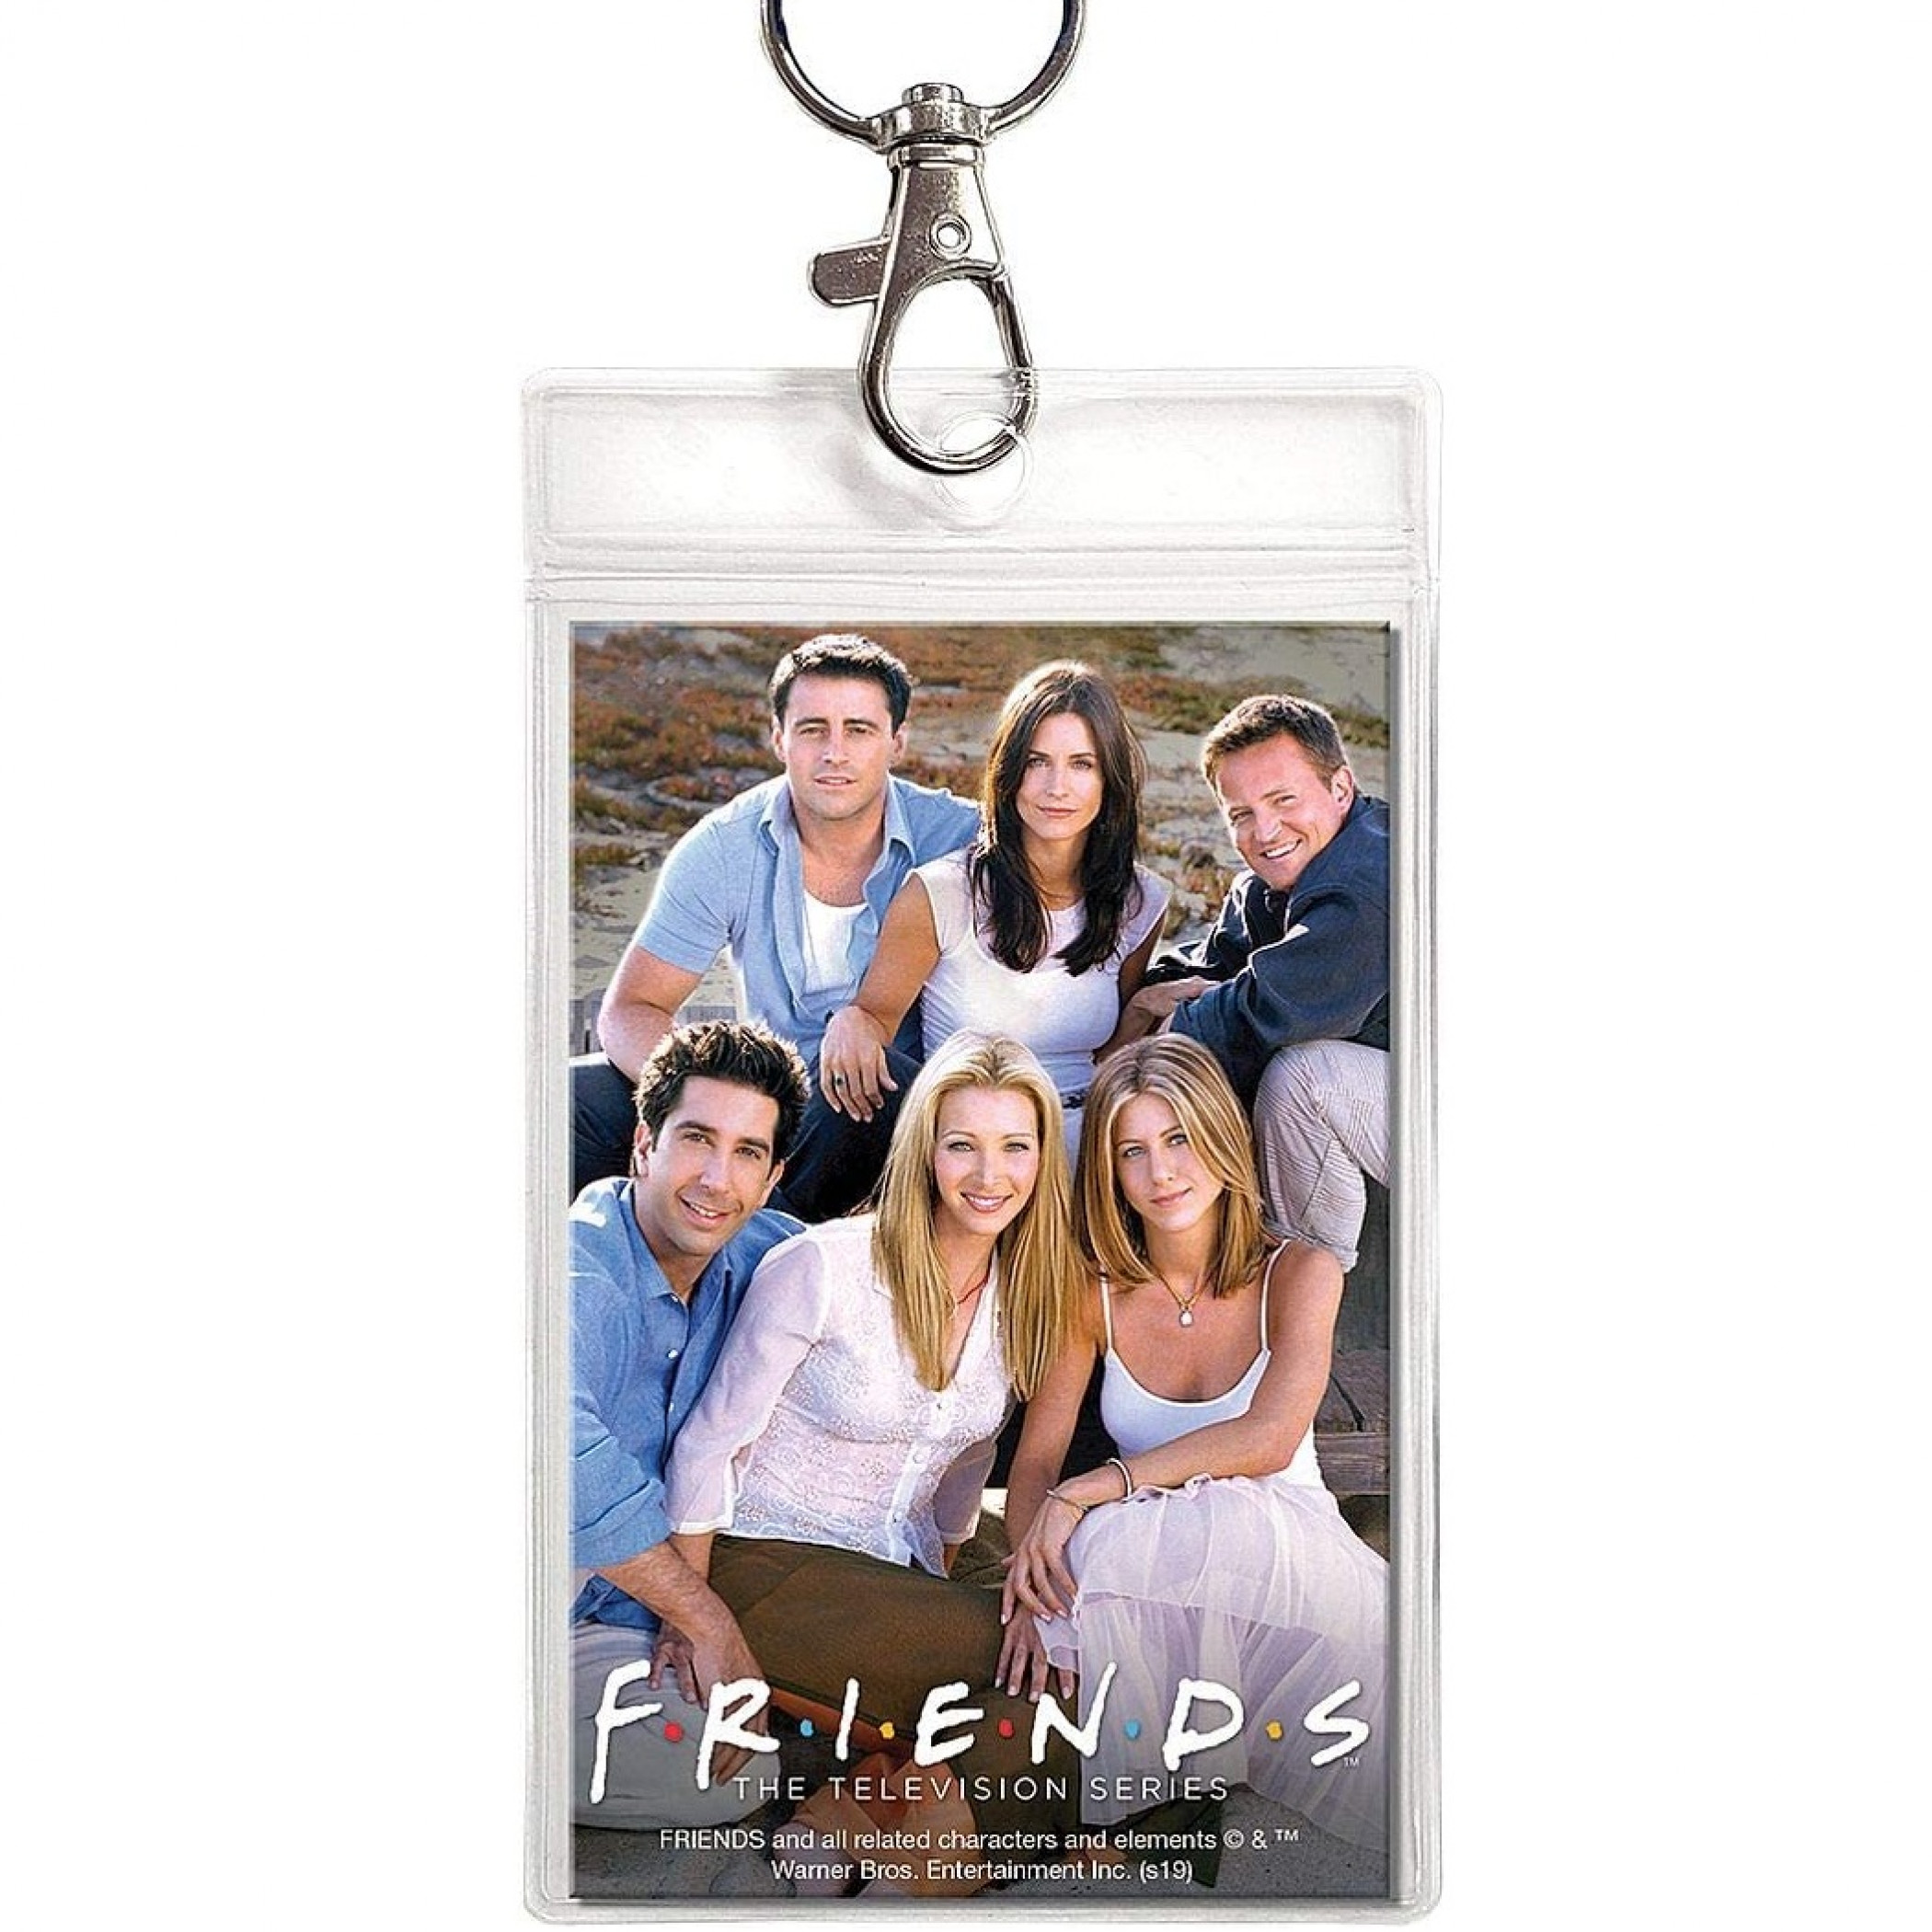 Friends TV Show Reversible Lanyard with Breakaway Clip and ID Holder